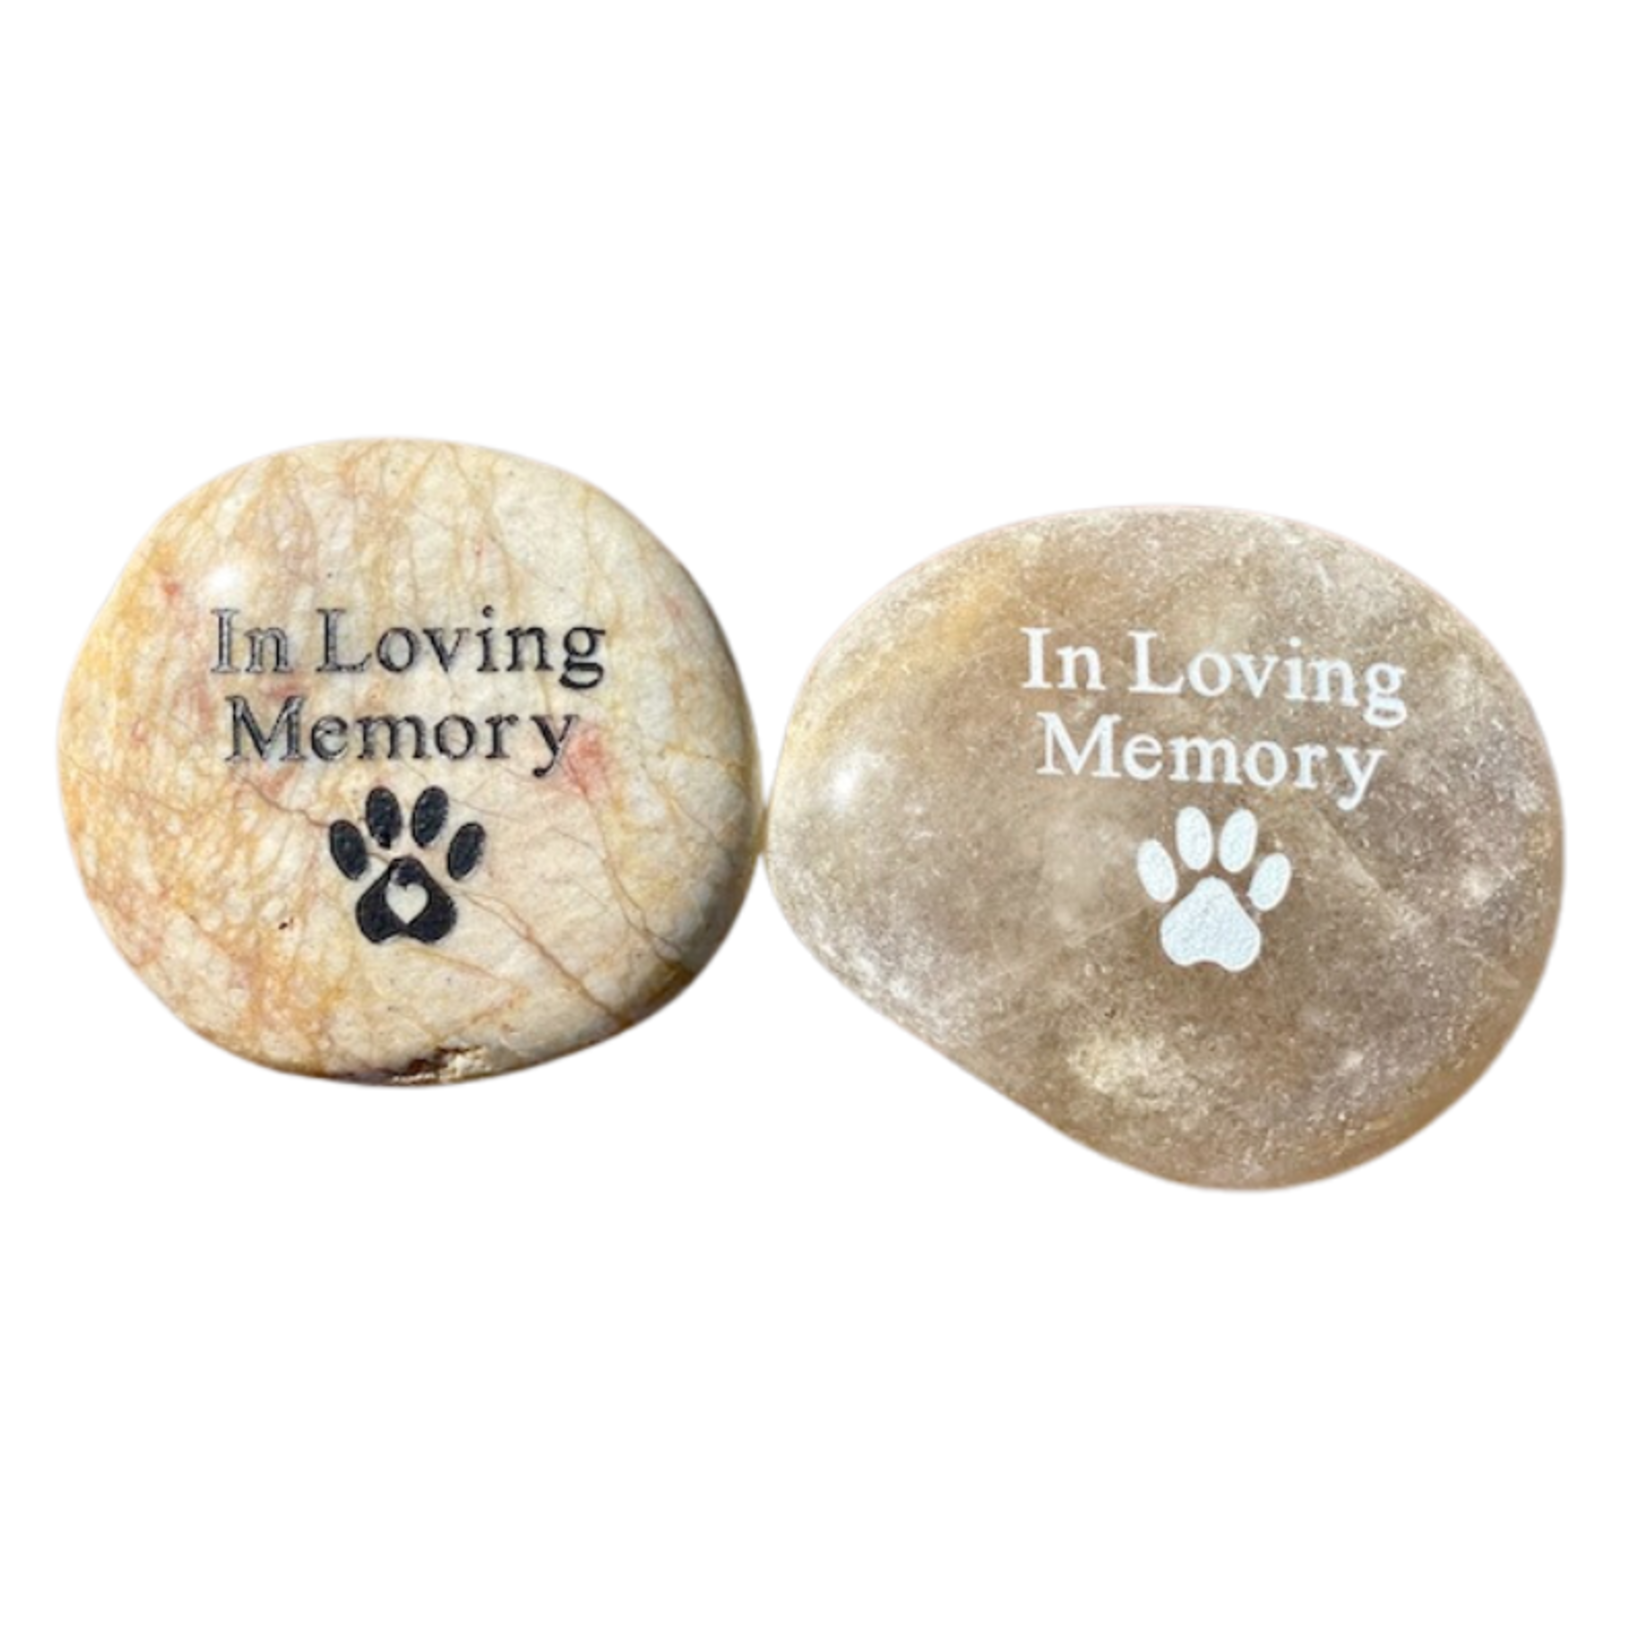 In Loving Memory (pawprint) - Engraved River Rock - ShopGiveCourage